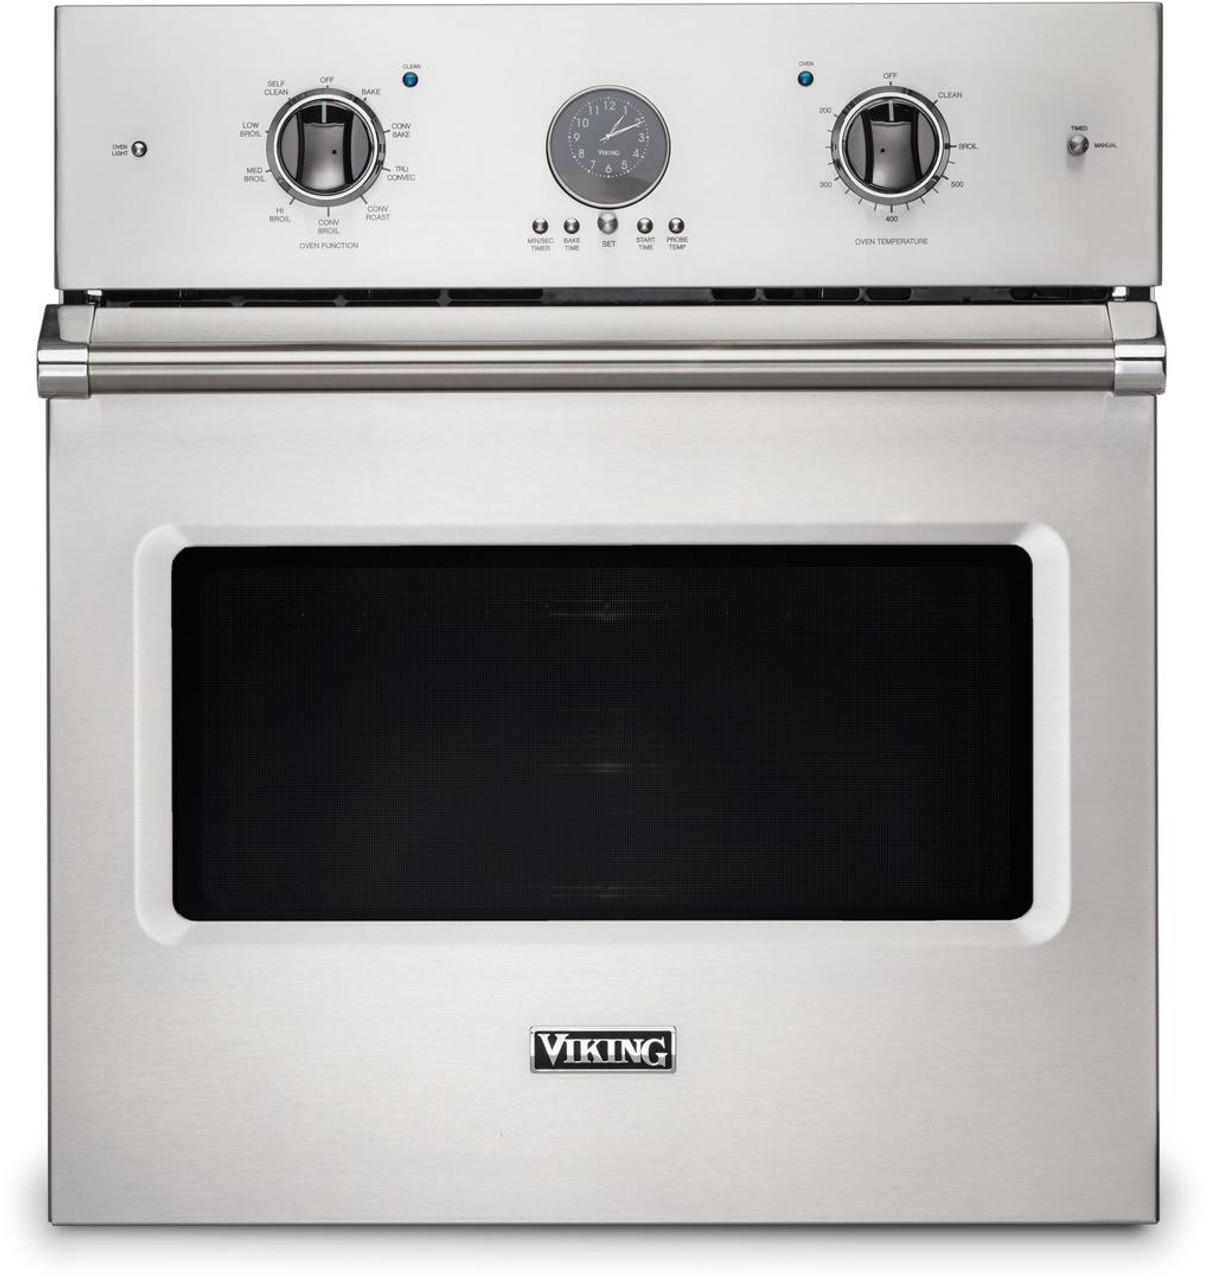 VSOE527SS Viking 27 Professional 5 Series Built-In Electric Single Premier  Oven with Exclusive Black Chrome